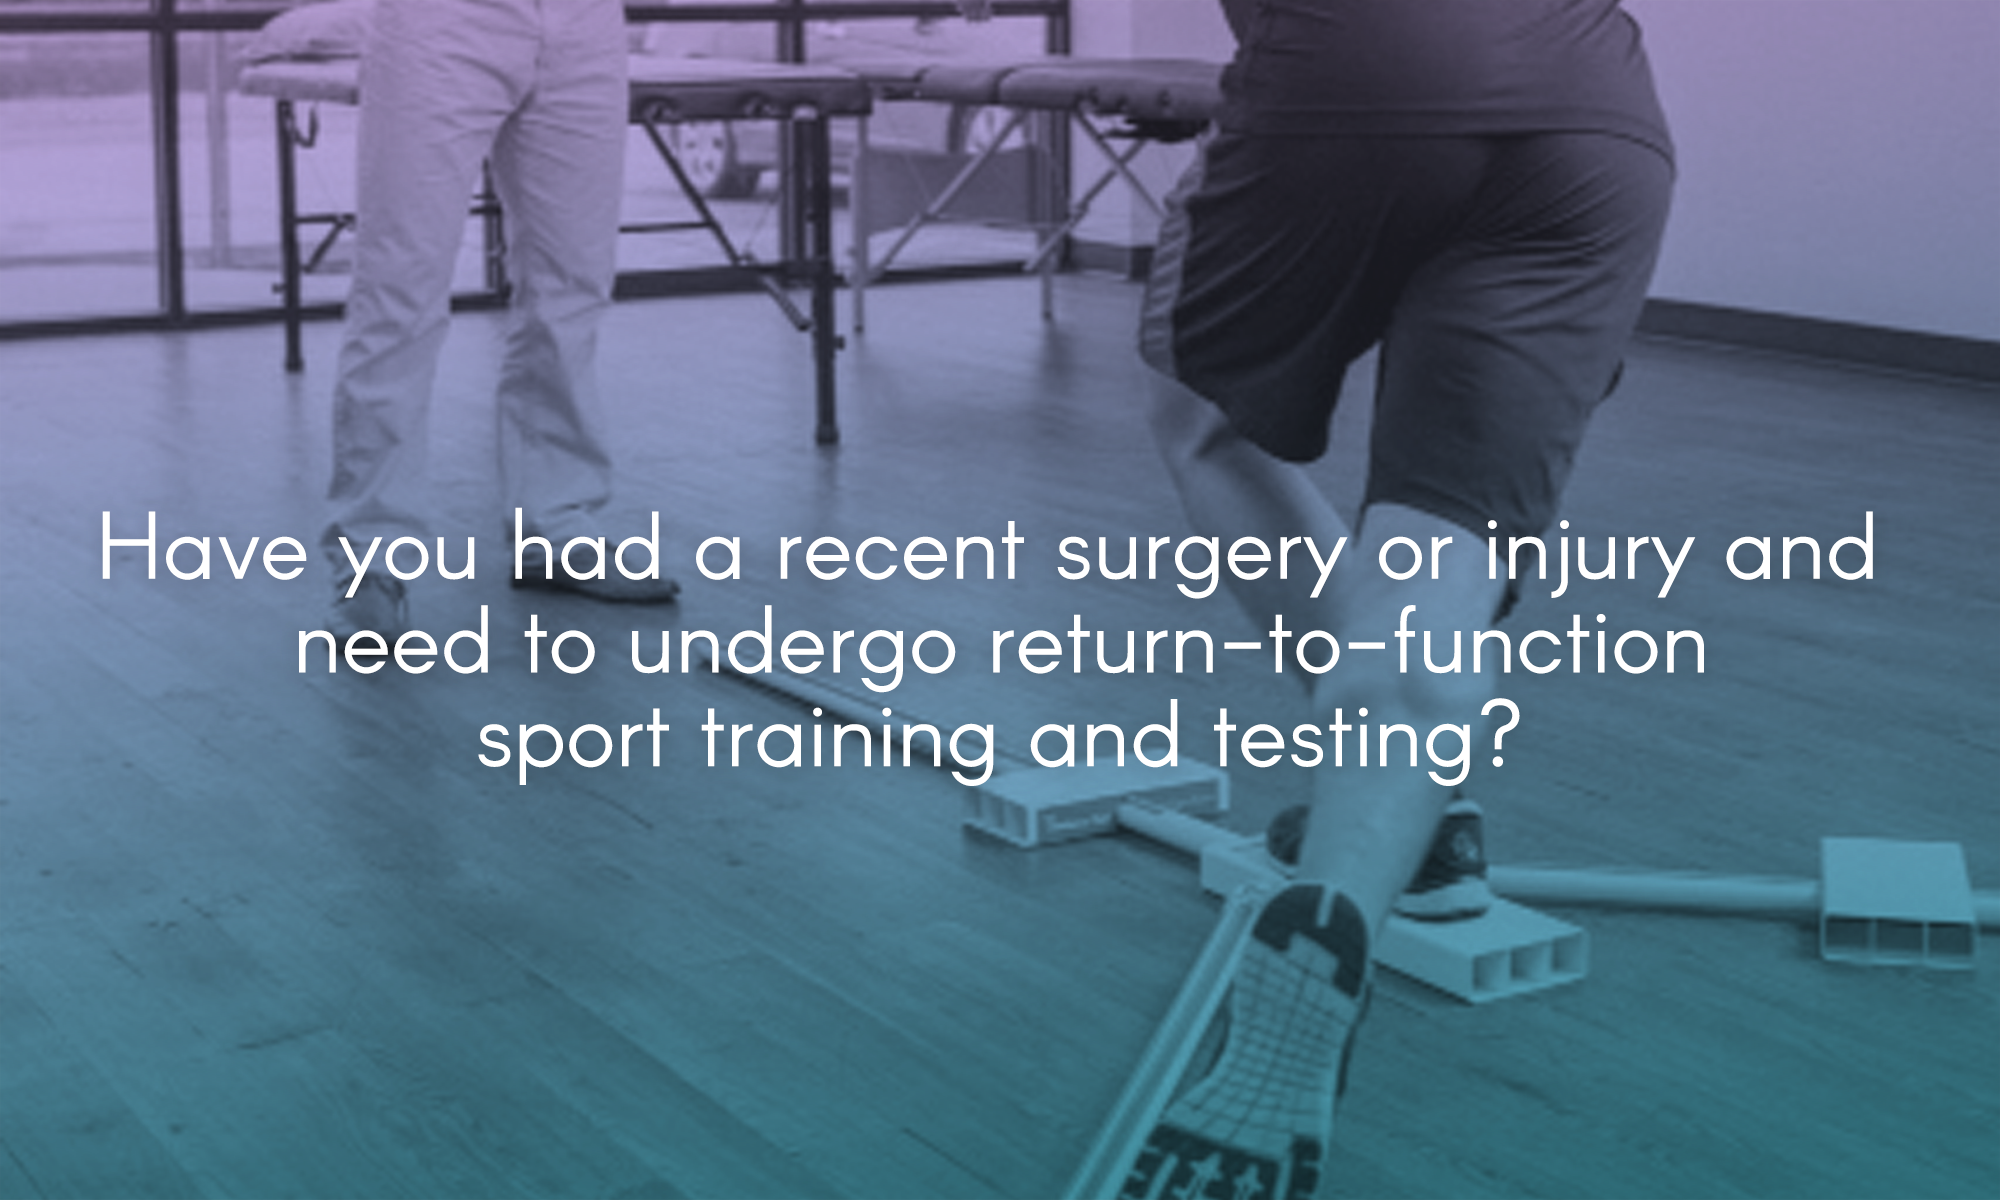  Have you had a recent surgery or injury and need to undergo return-to-function/sport training and testing? 